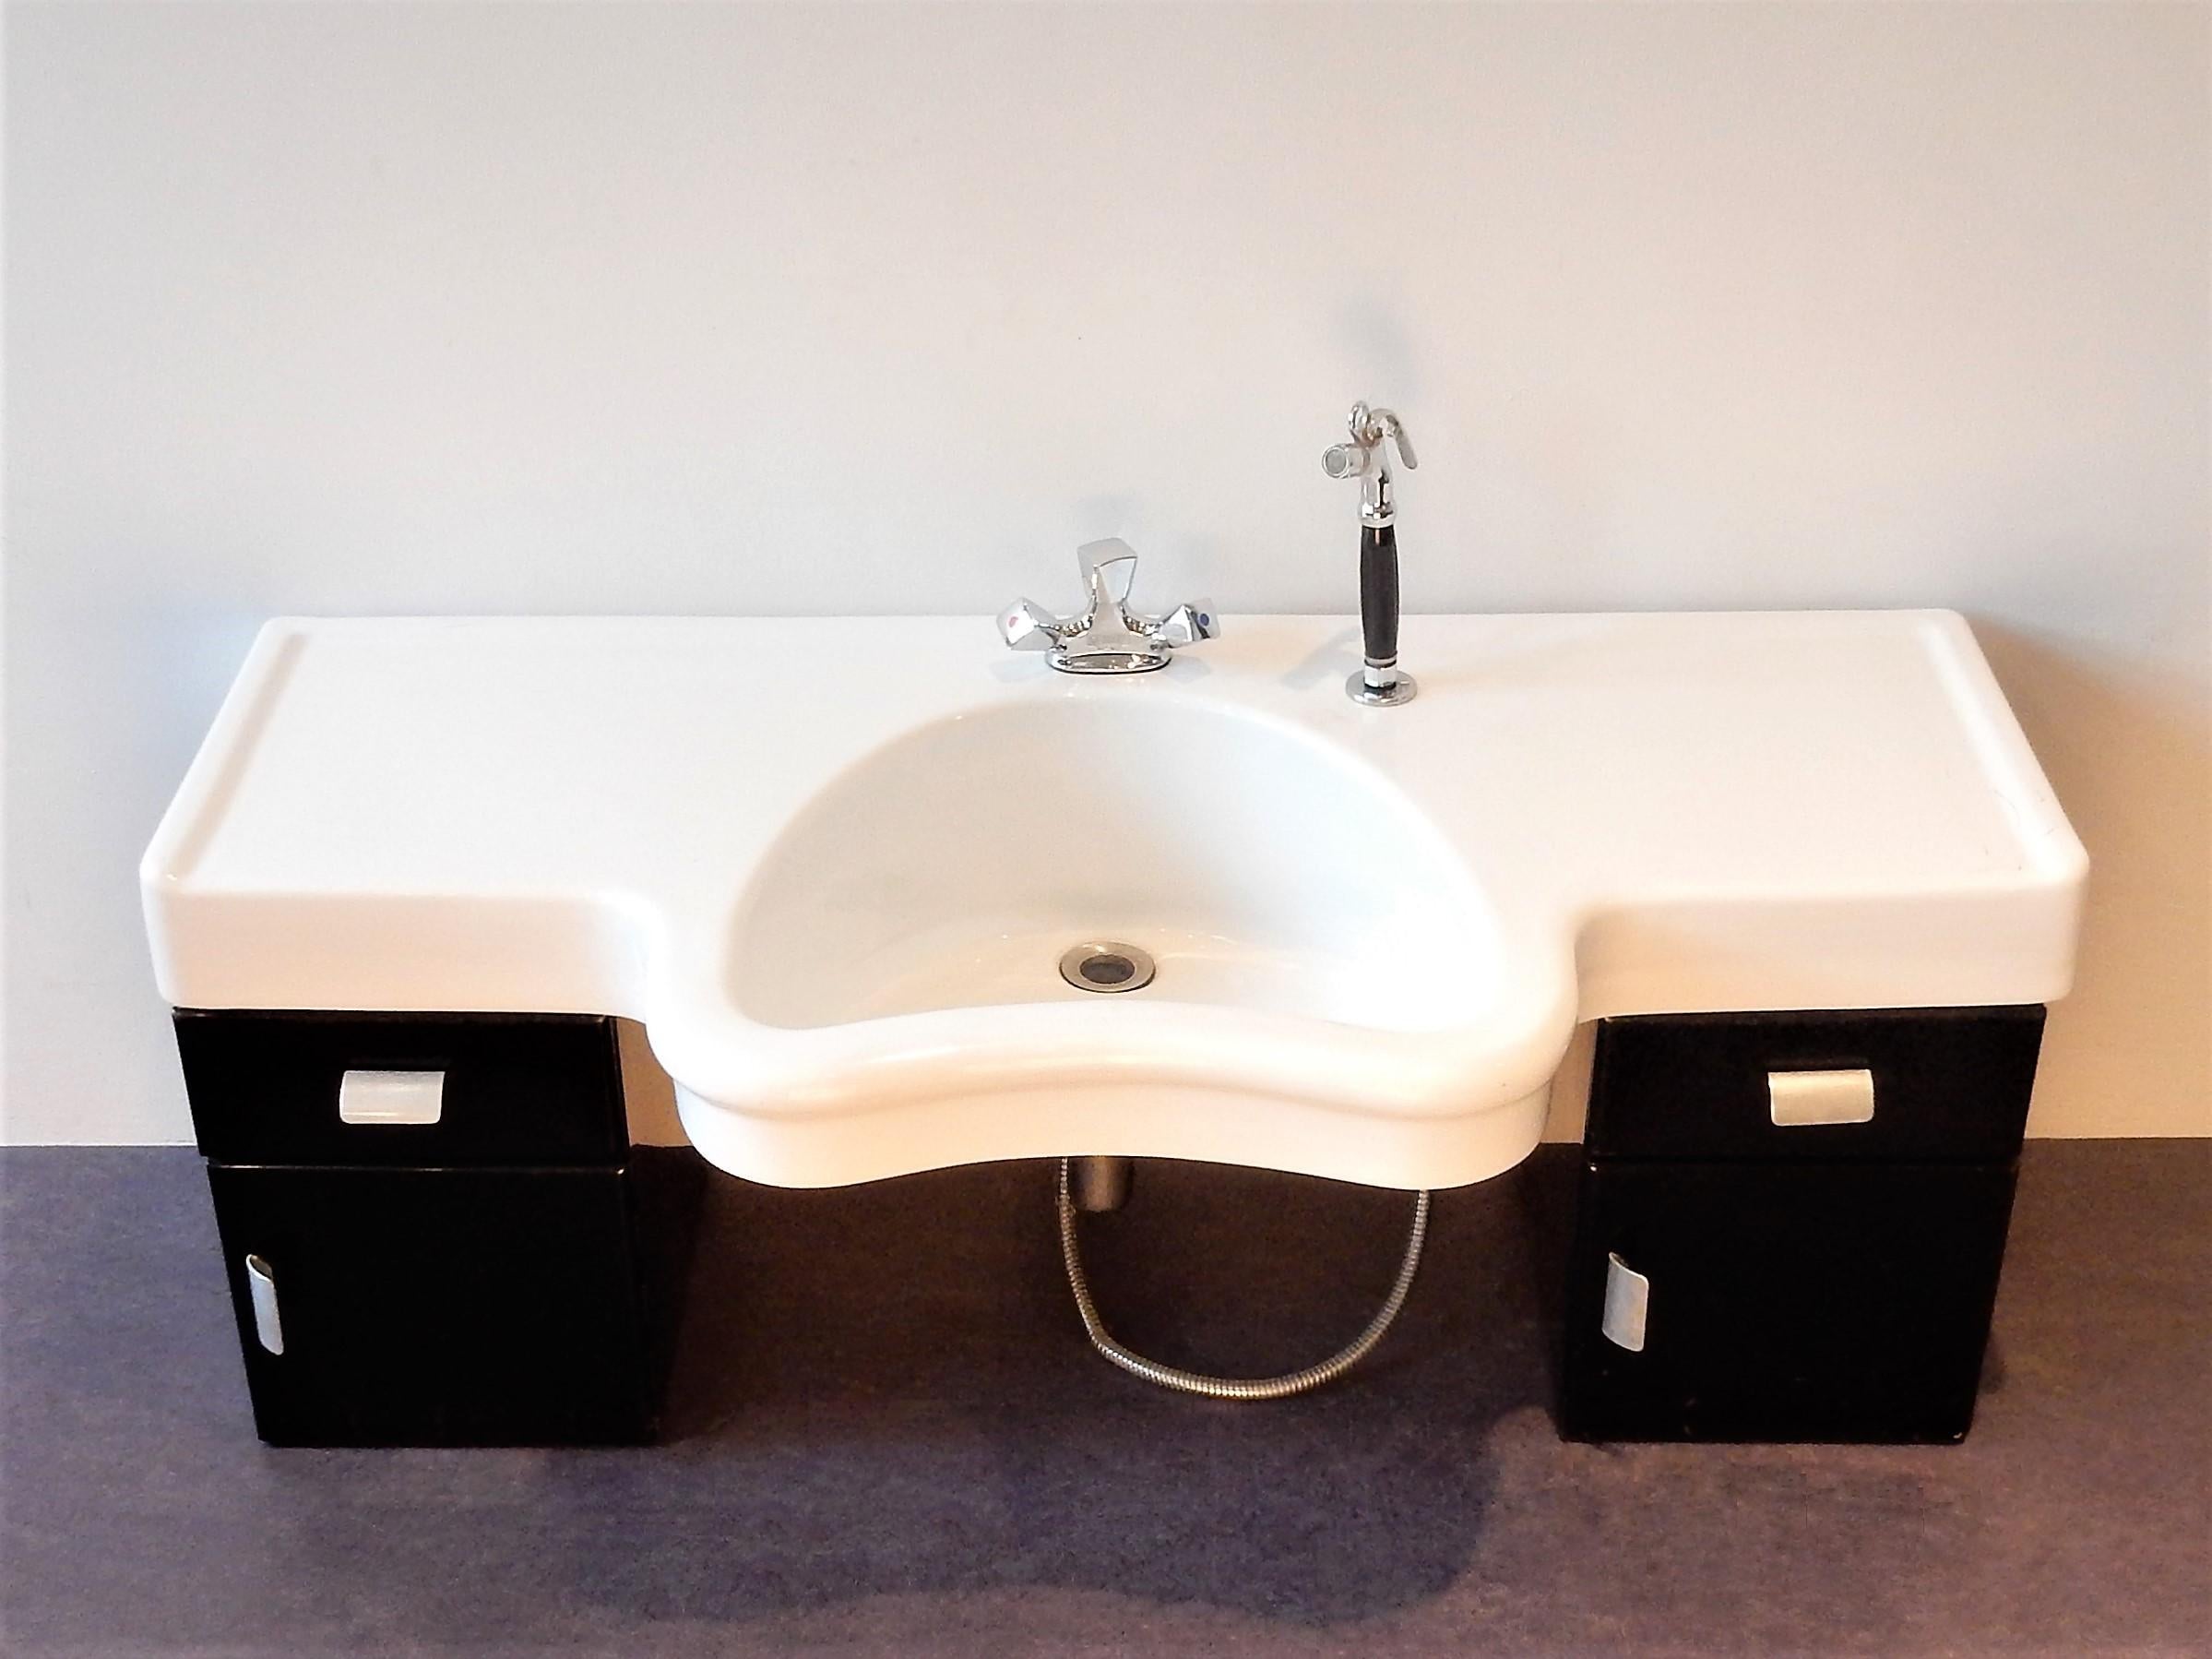 This vintage hairdressers wash basin was designed in 1927 by Olymp, a Stuttgart-based family business that exists since 1901 and sets up hairdressing salons all-over the world. This piece was Olympus' first hygienic, functional forward sink with